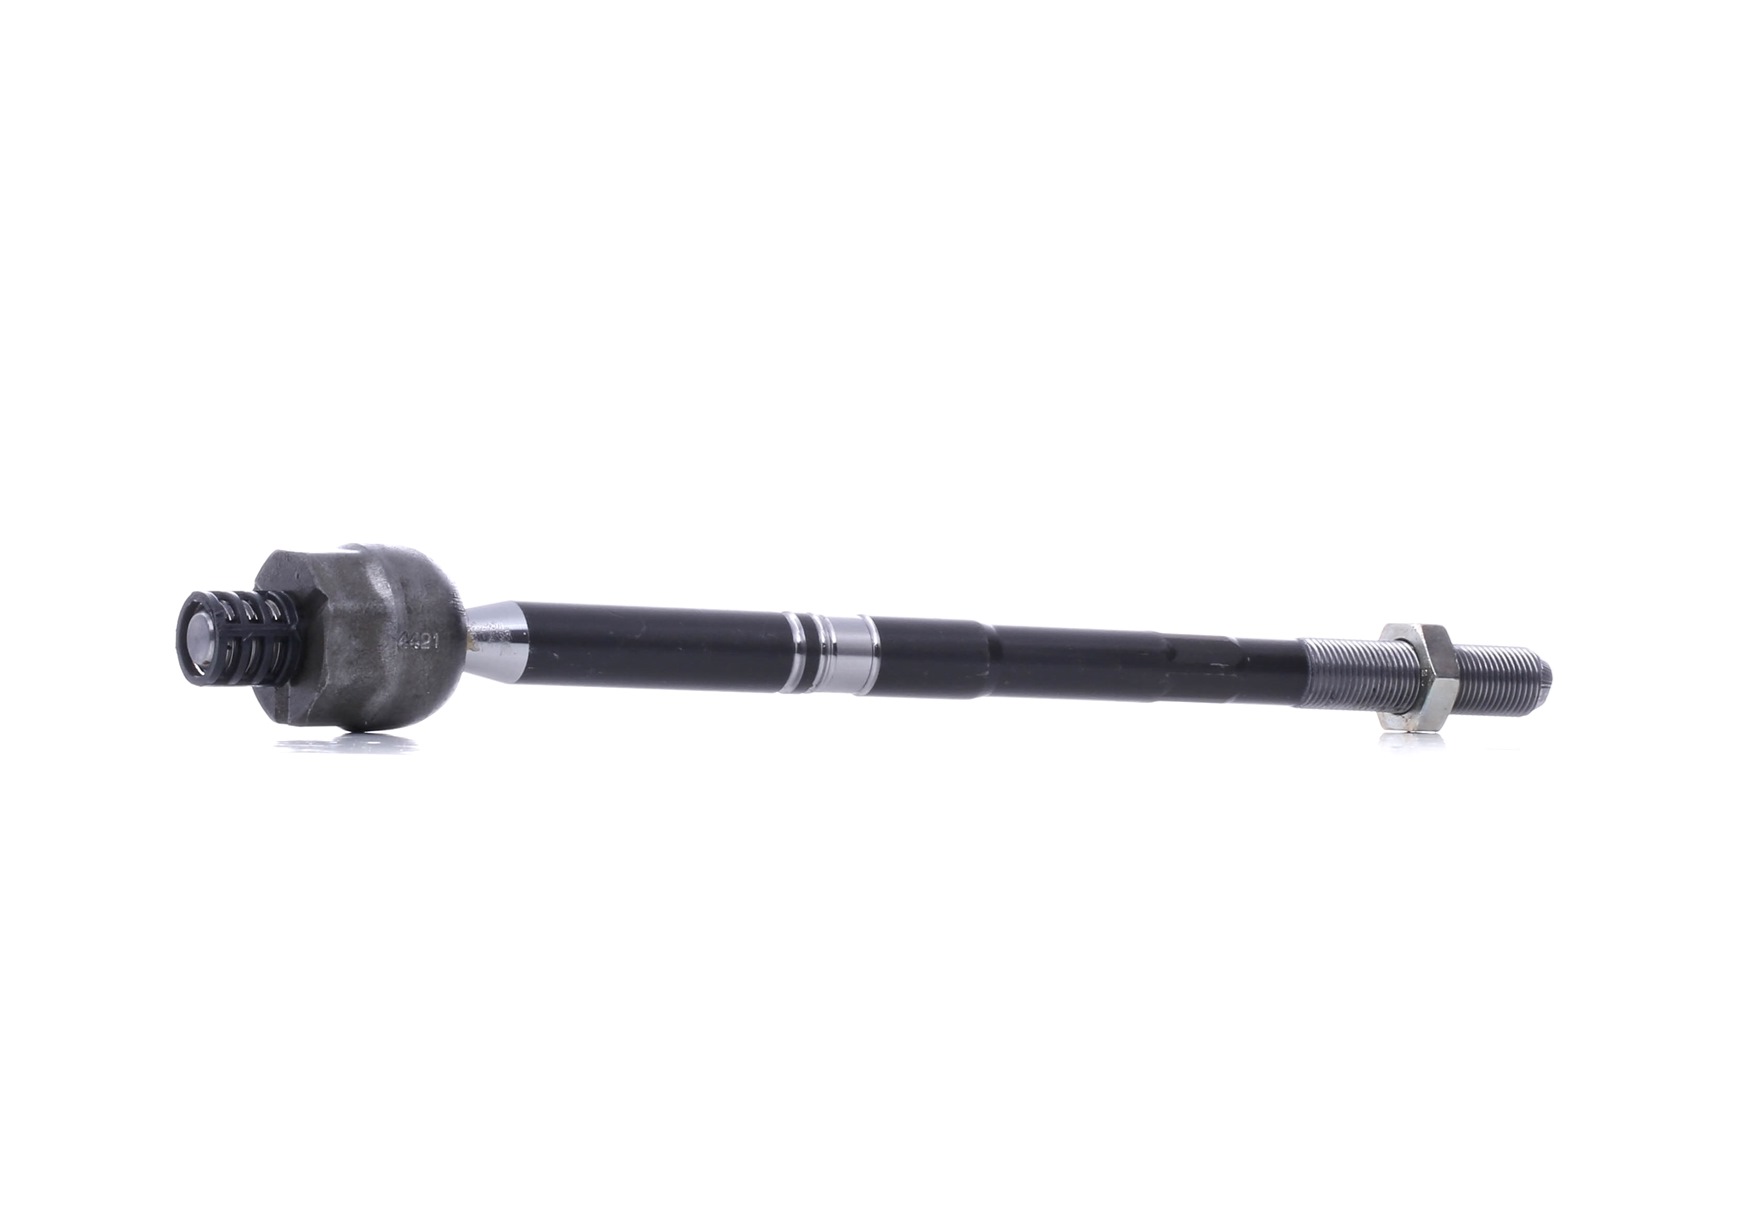 Rack end FEBI BILSTEIN Front Axle Left, Front Axle Right, 311 mm, Bosch-Mahle Turbo NEW, with lock nut - 26045